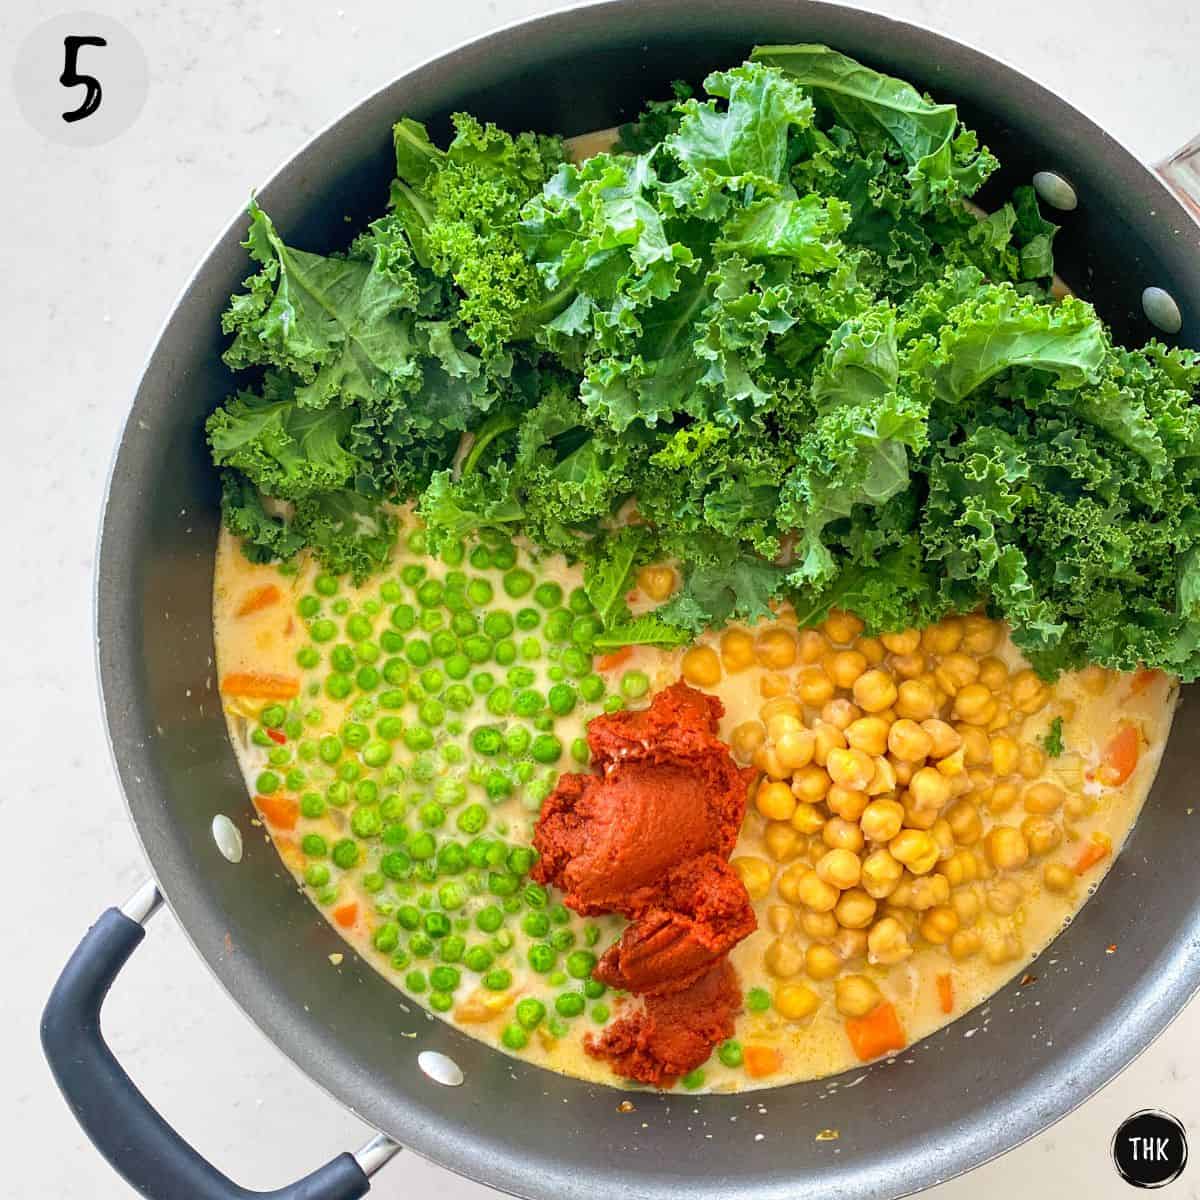 Deep skillet with chickpeas, red paste, peas, kale and creamy liquid.